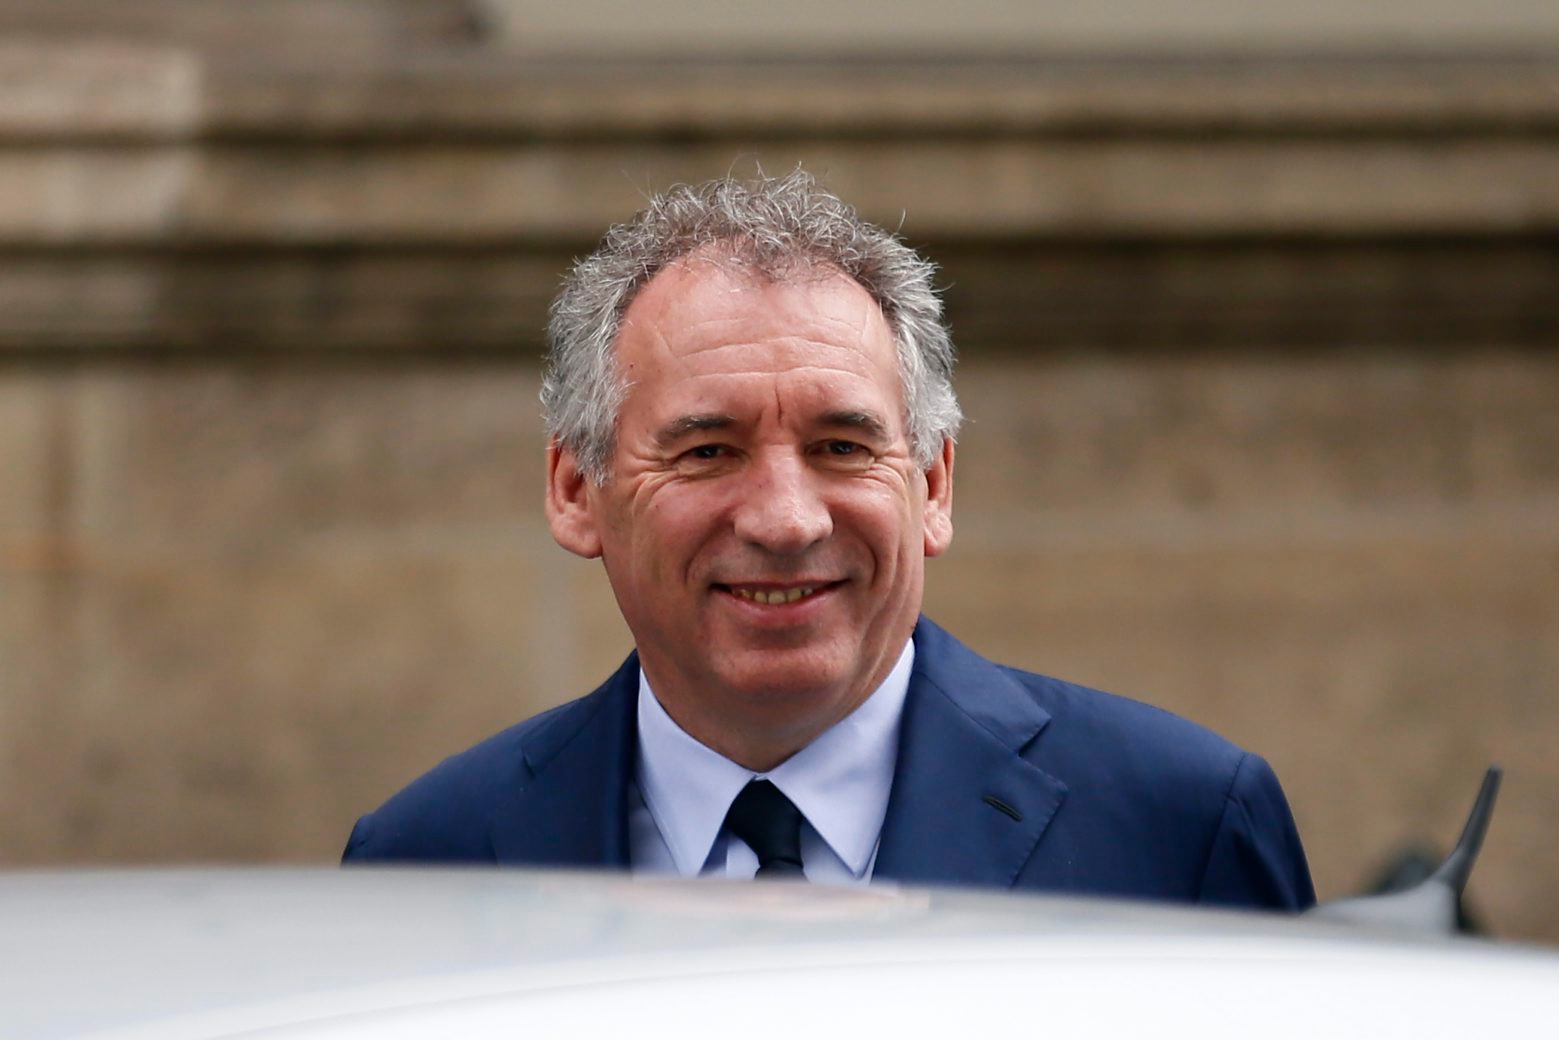 ARCHIVBILD ZUM RUECKTRITT DES FRANZOESISCHEN JUSTIZMINISTERS FRANCOIS BAYROU, AM MITTWOCH, 21. JUNI 2017 - New French Justice Minister Francois Bayrou leaves after the first weekly cabinet meeting under new French President Emmanuel Macron, Thursday, May 18, 2017 at the Elysee Palace in Paris. Macron named a mix of prominent and unknown figures from the left and the right to make up the government. (AP Photo/Francois Mori) FRANKREICH JUSTIZMINISTER BAYROU RUECKTRITT